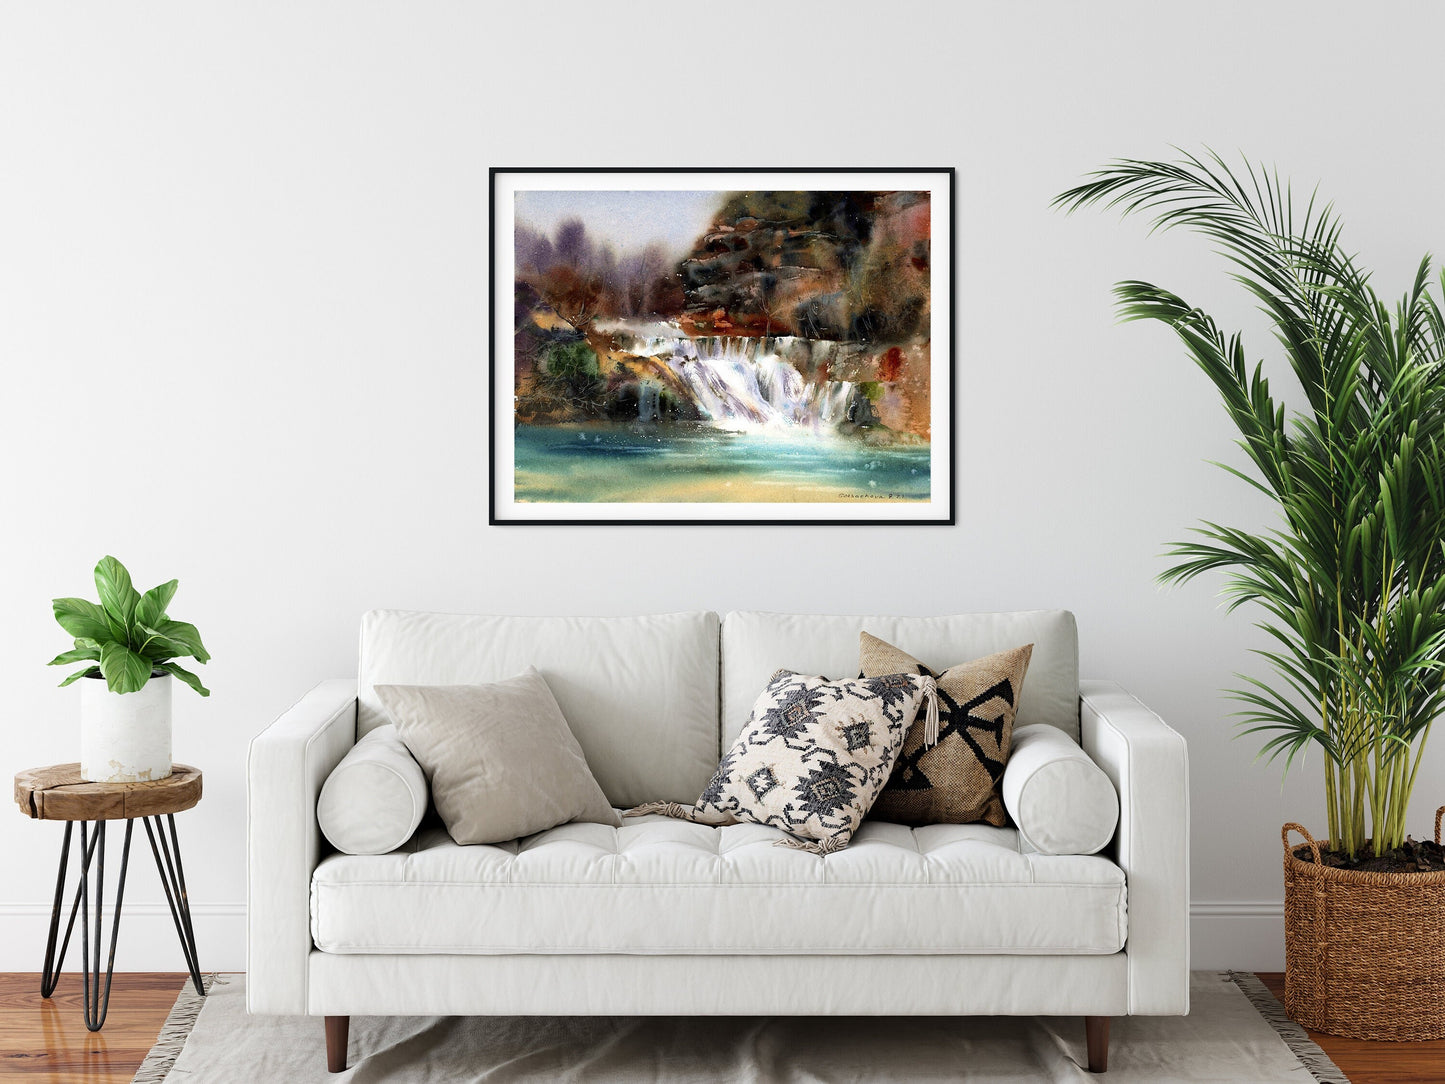 Beautiful Nature Landscape, Tropic Waterfall Wall Art, Canvas Print Design, Decor for Home & Office Decoration